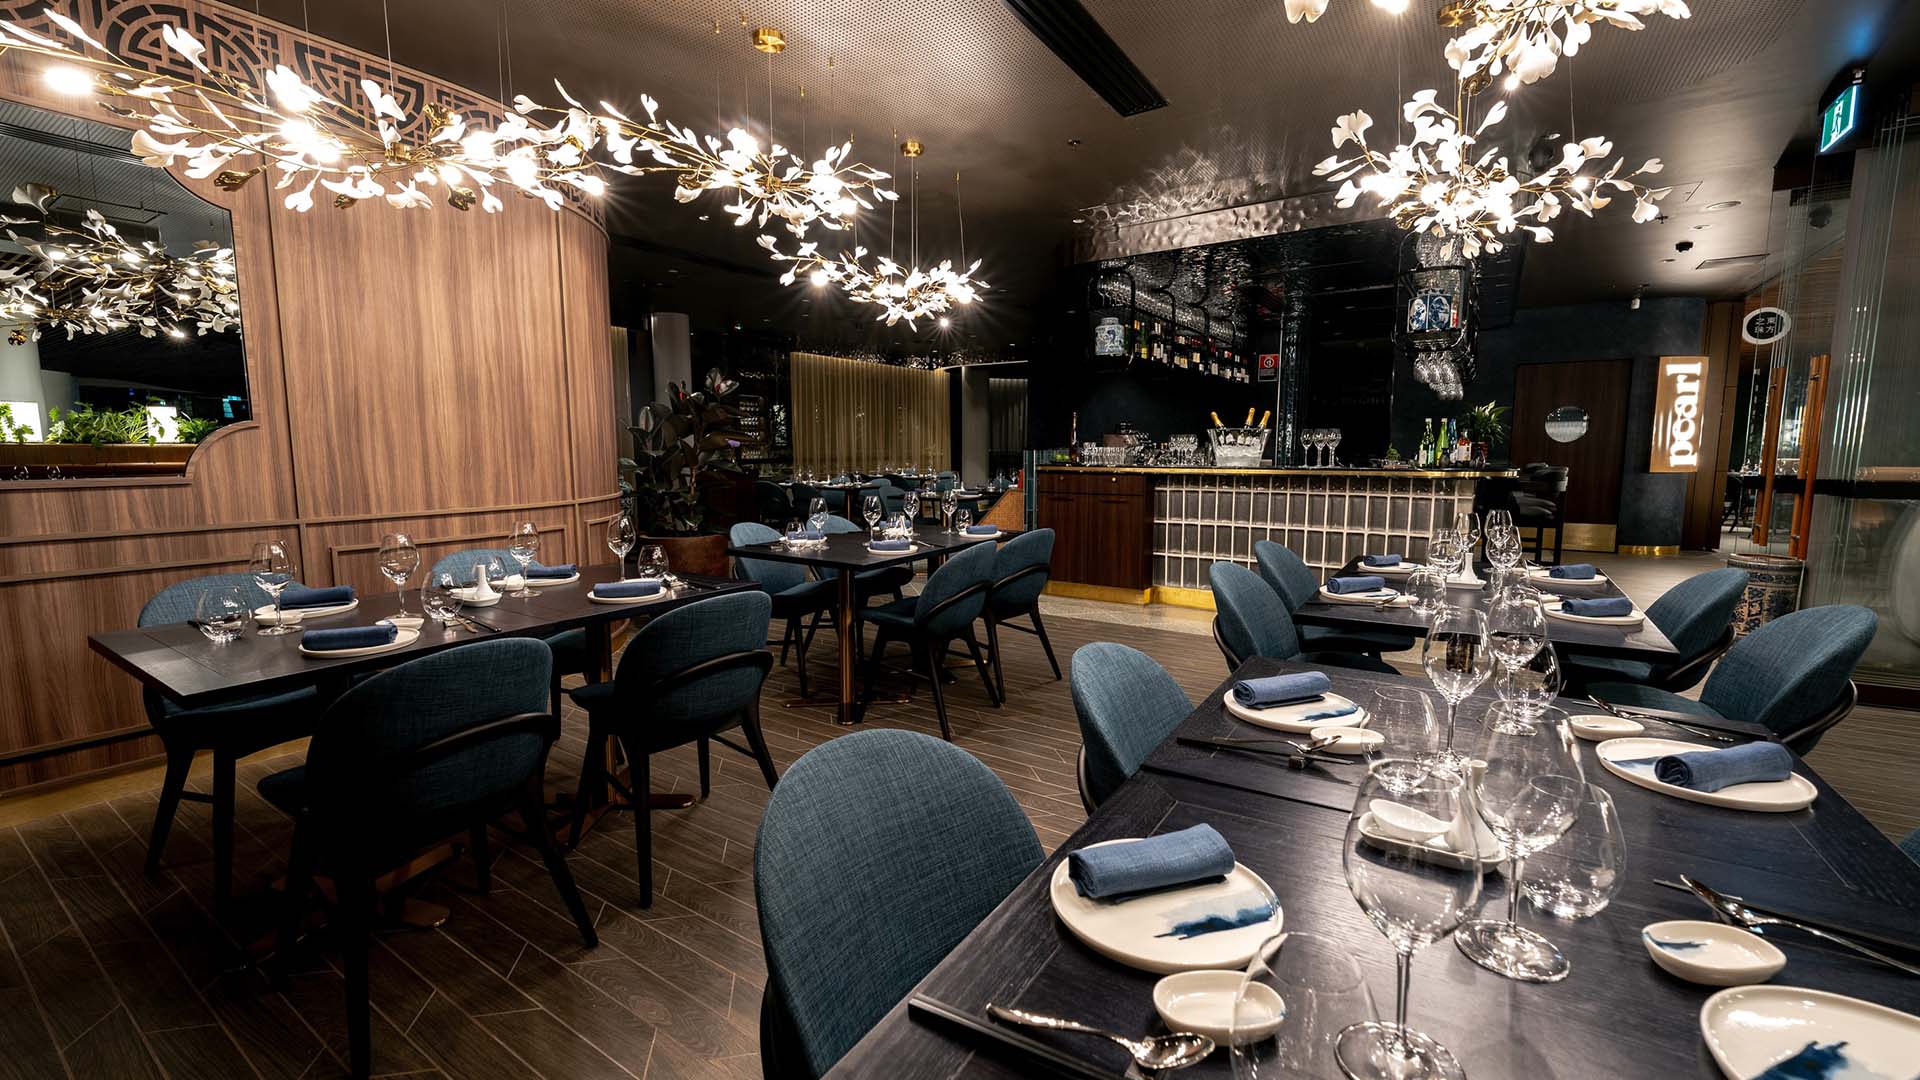 The luxurious dining room with speckled light fixtures at Circular Quay's Pearl